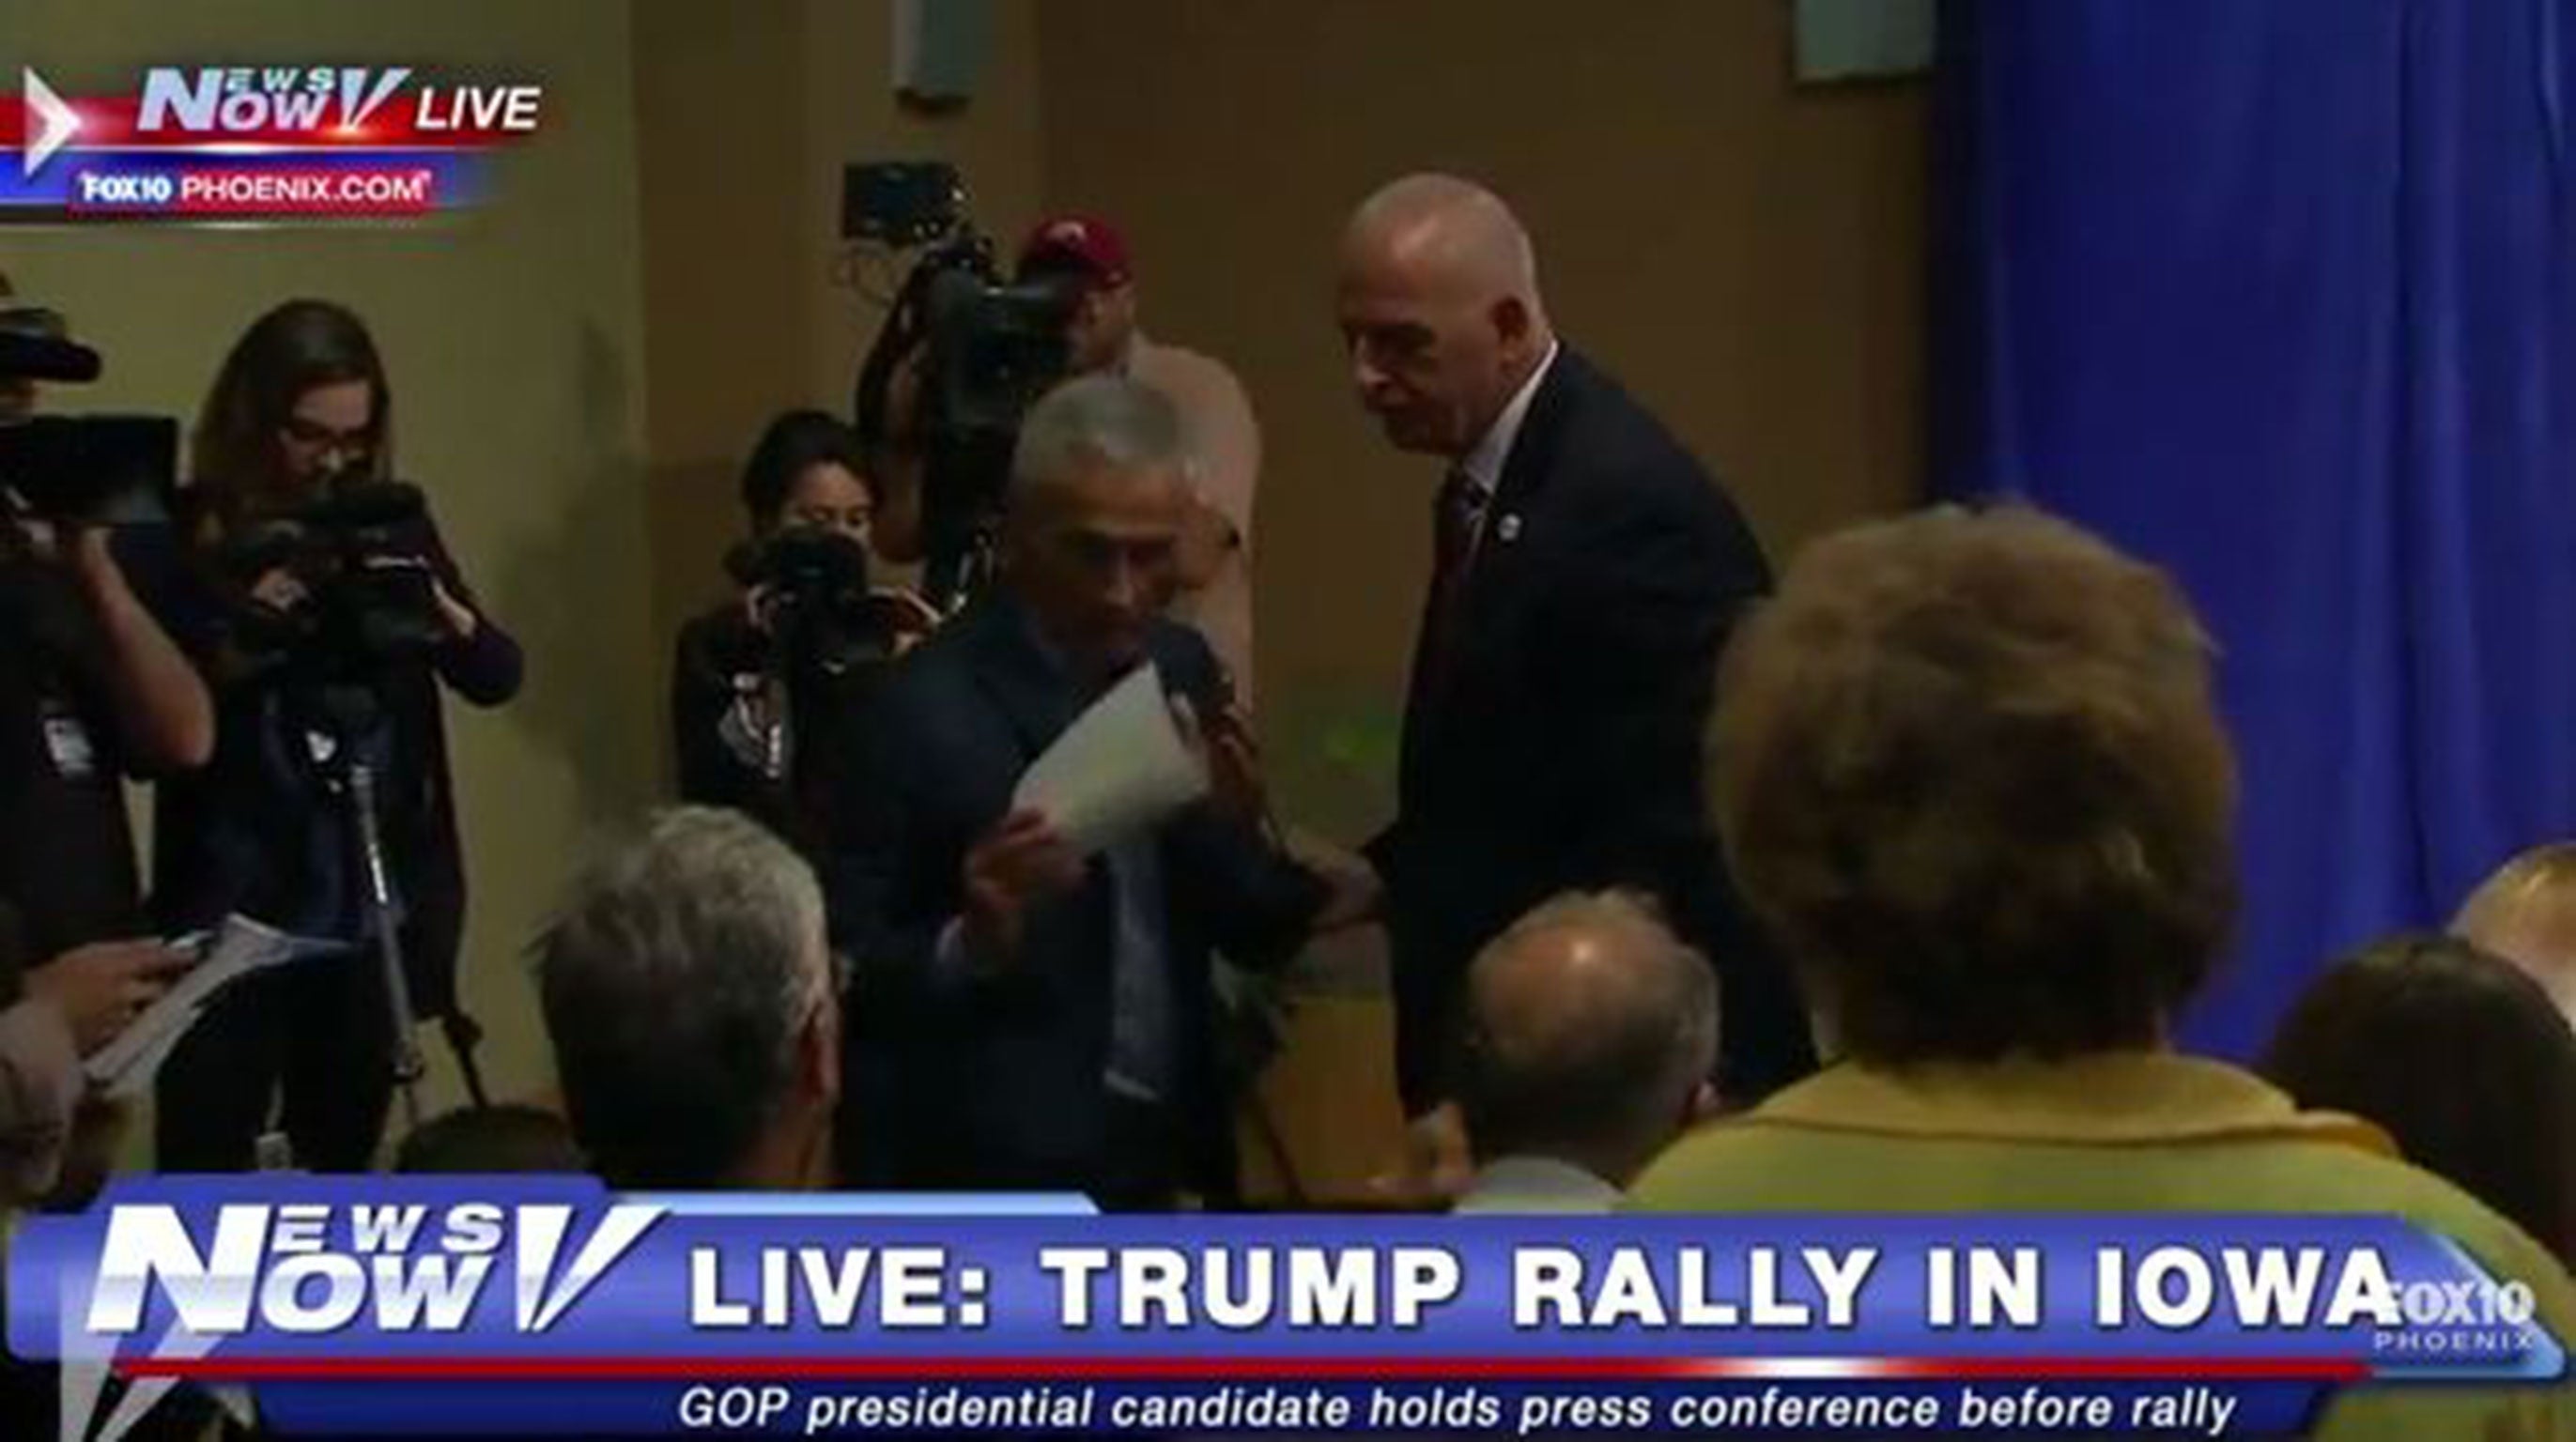 Journalist Jorge Ramos is escorted out of a Donald Trump press conference